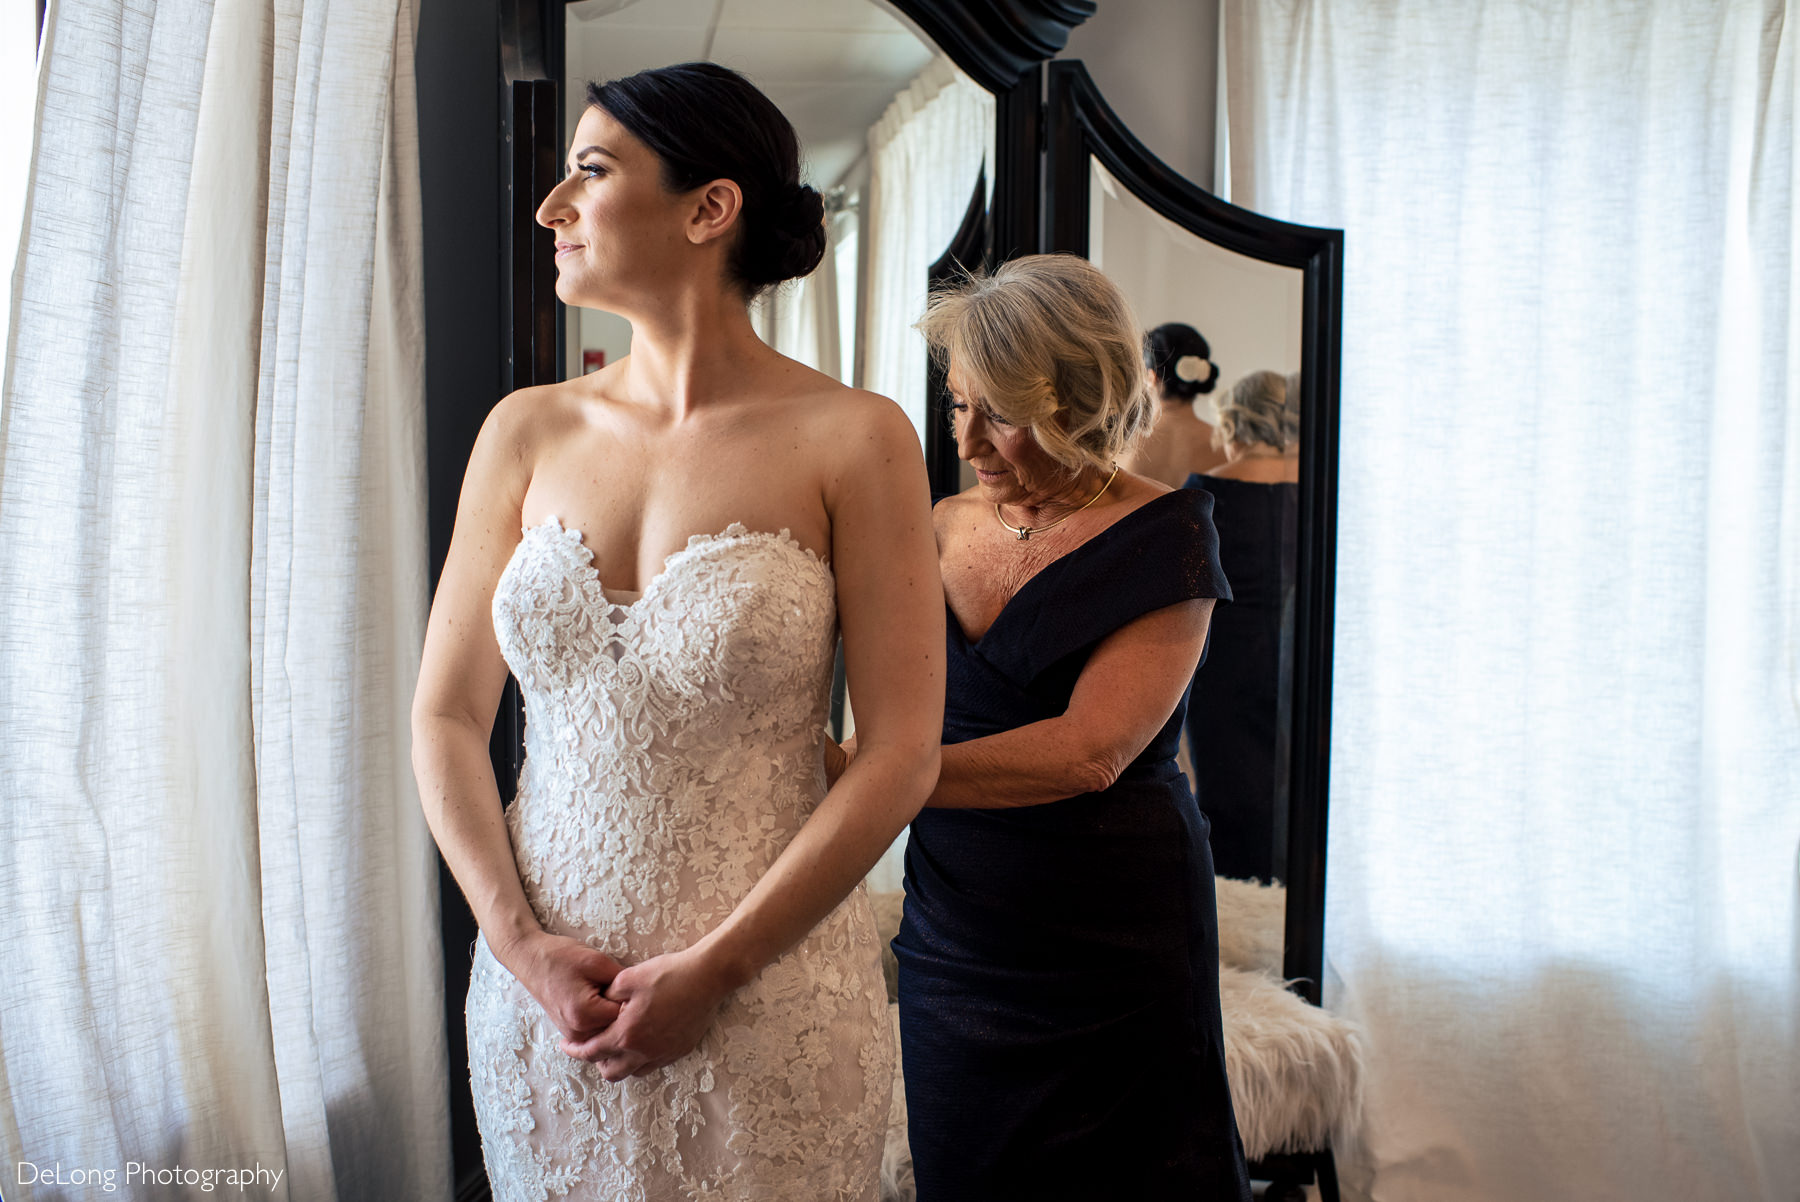 Mother of the Bride zipping up bride's dress in the bridal suite at Childress Vineyards by Charlotte Wedding Photographers DeLong Photography